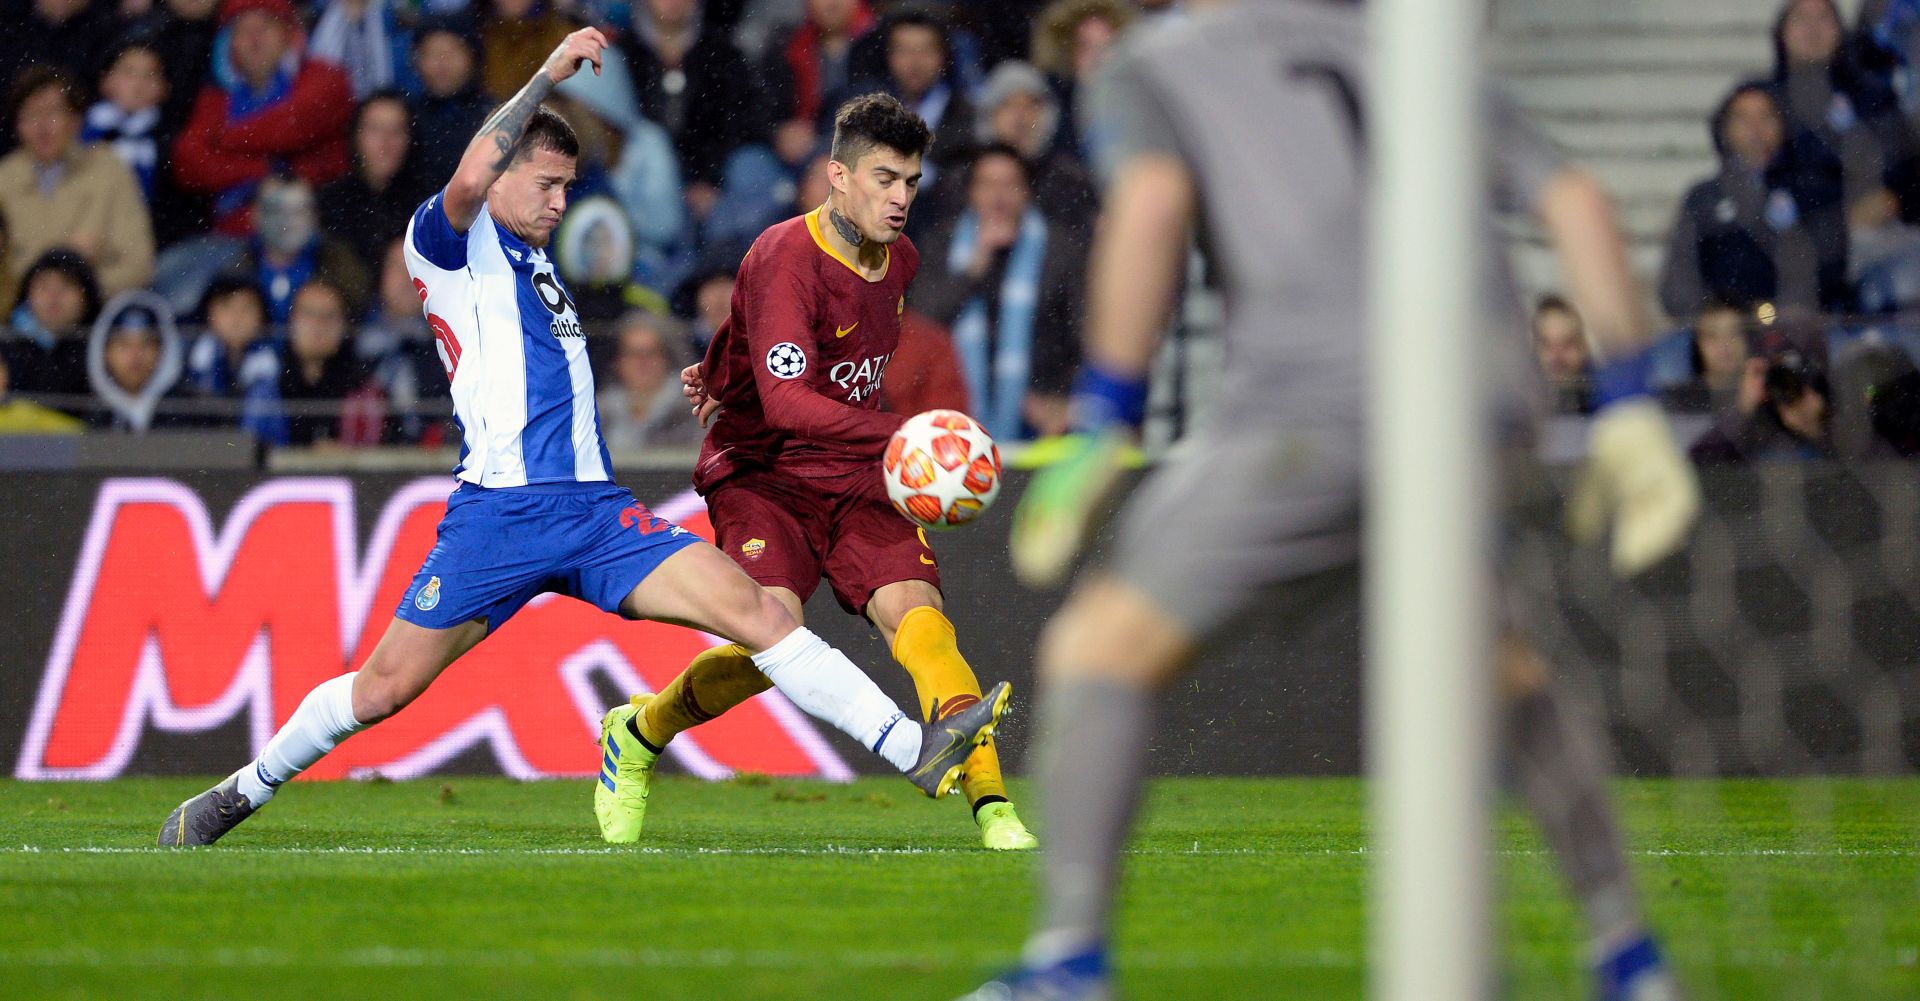 epa07418156 FC Porto's Otávio (L) vies for the ball with Roma's Diego Perotti during their Champions League lround of 16 second leg soccer match, held at Dragao stadium, Porto, Portugal, 6 March 2019.  EPA/FERNANDO VELUDO